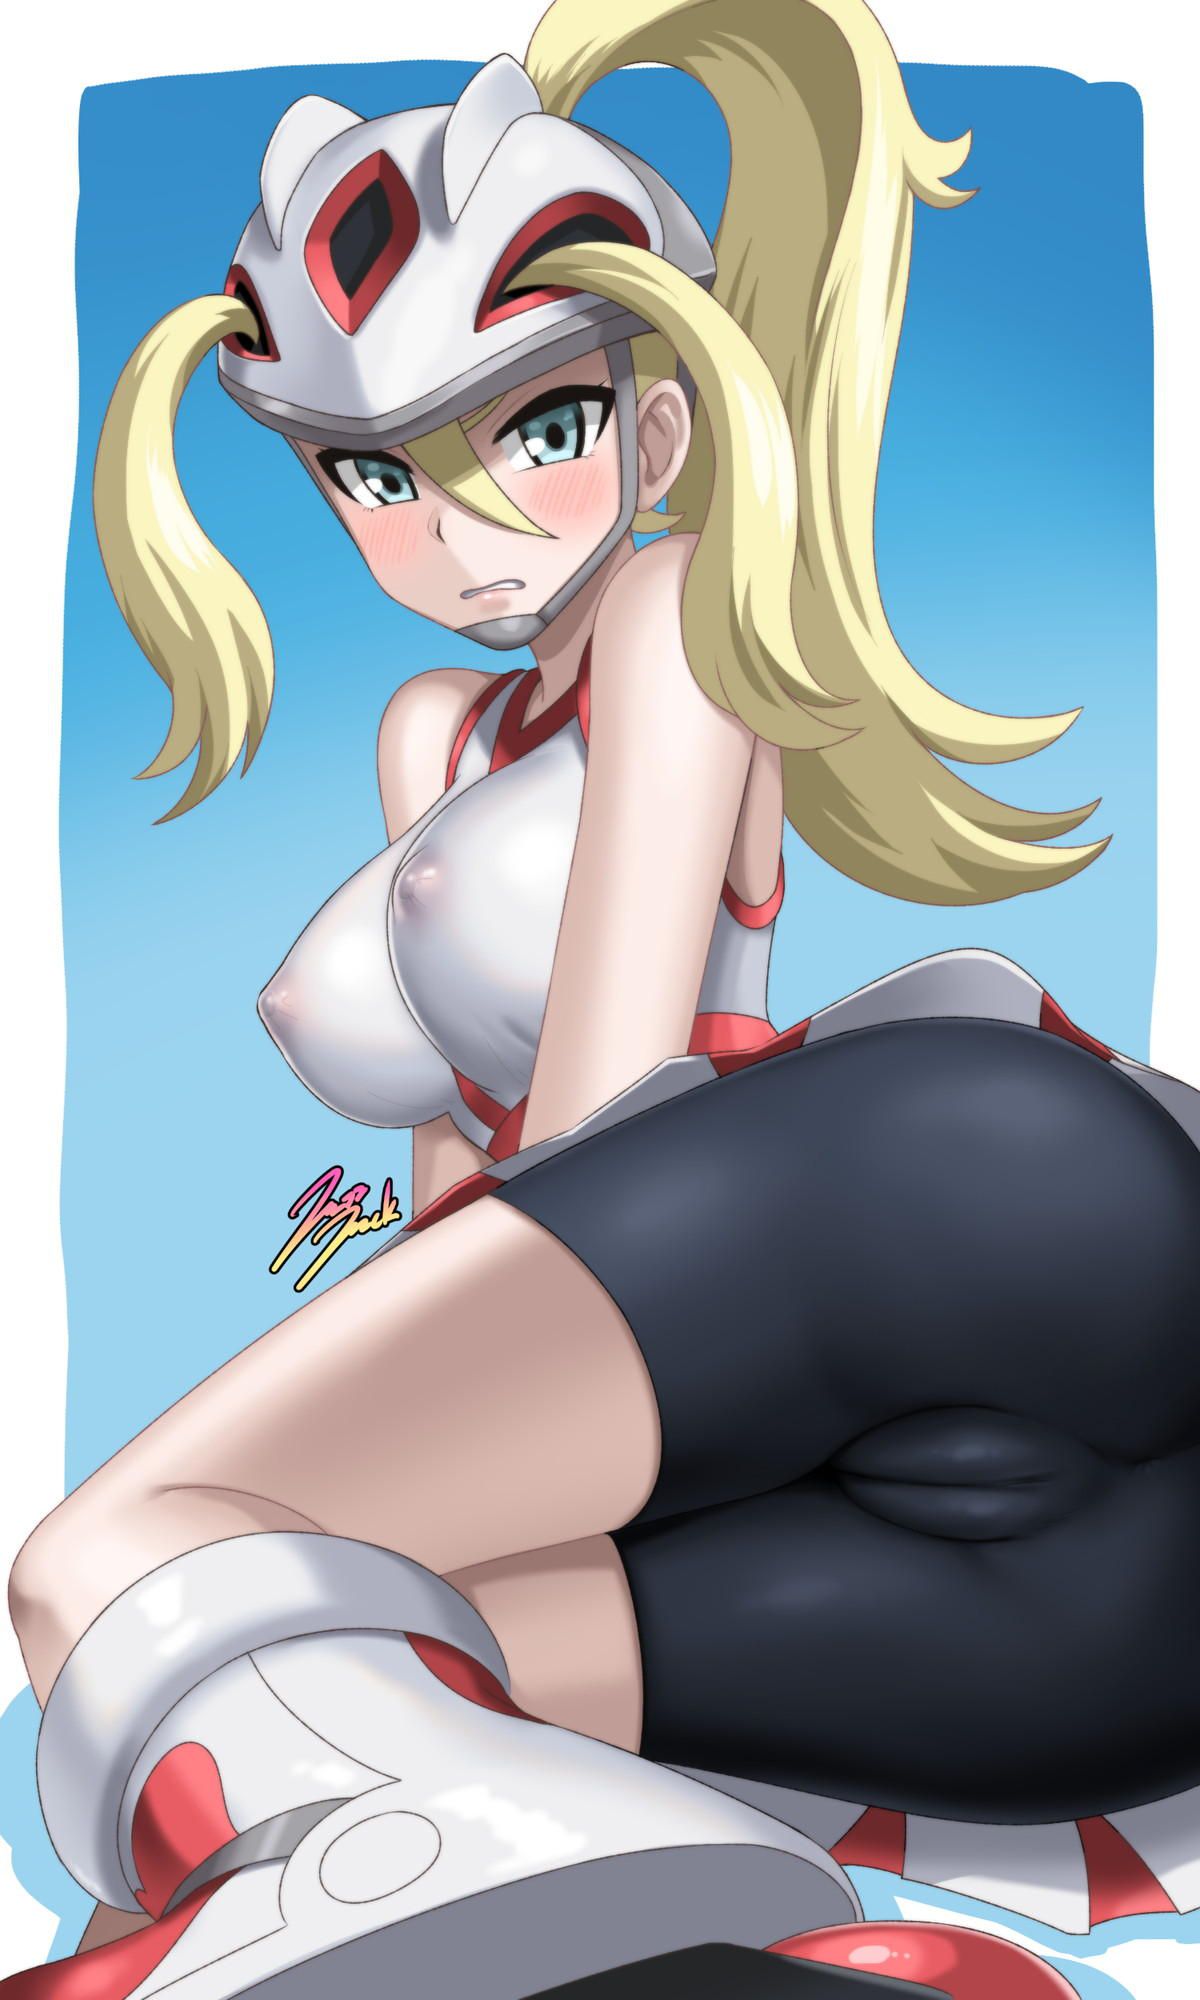 Release the erotic image folder of spats 10